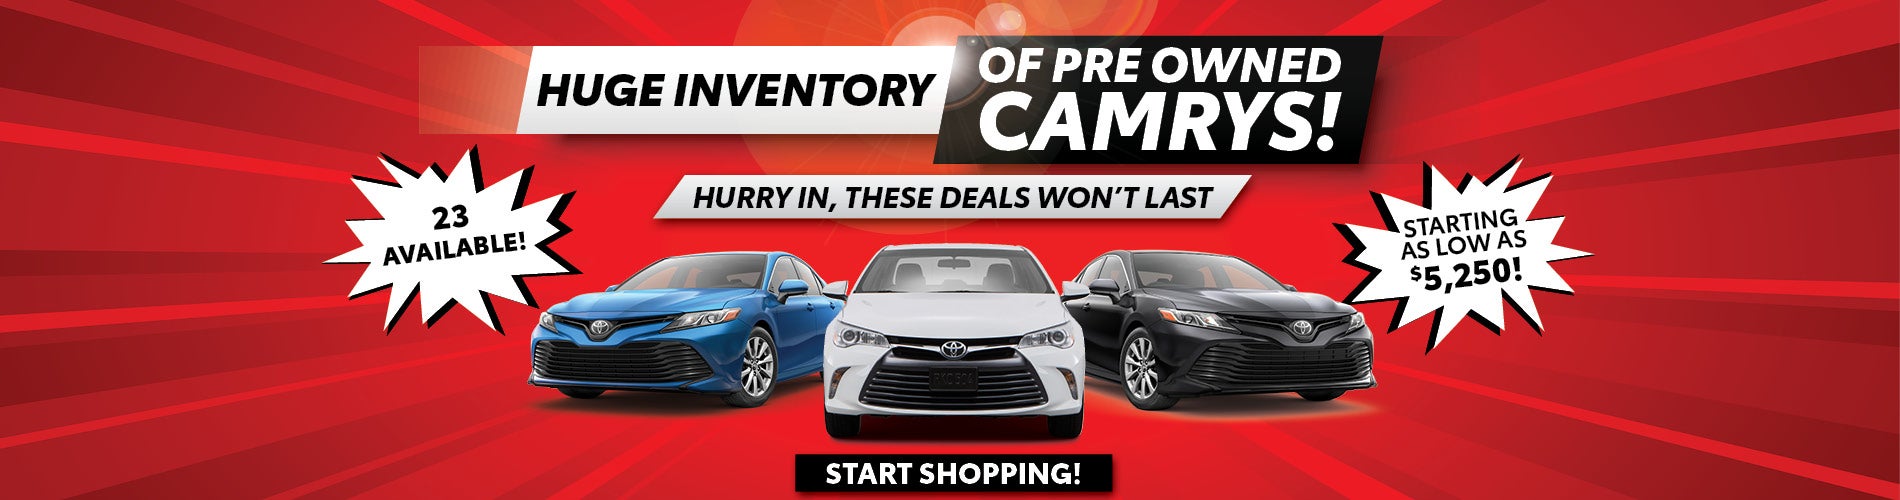 Pre-owned Camrys